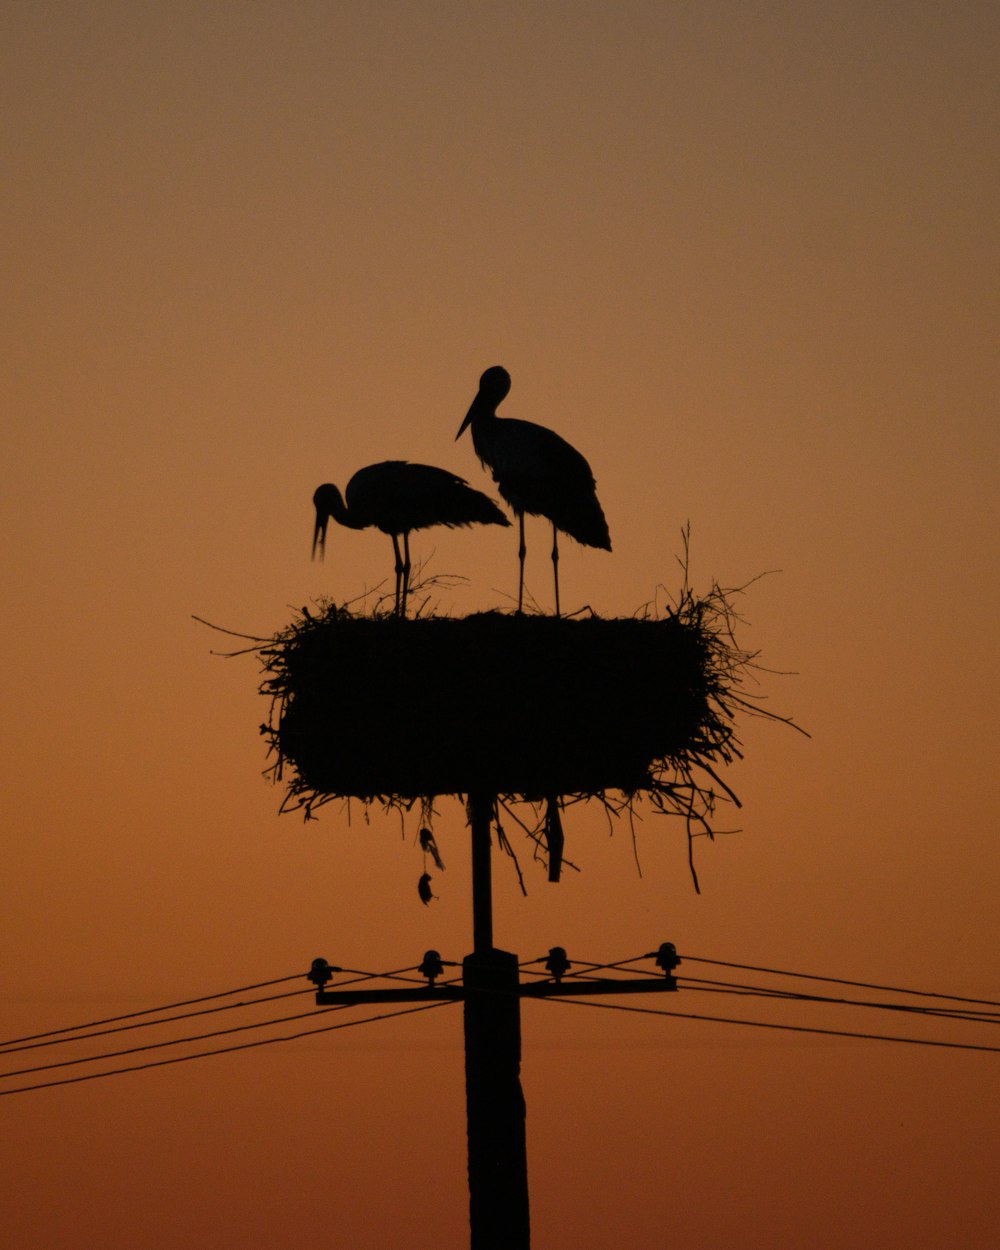 a couple of birds standing on top of a nest